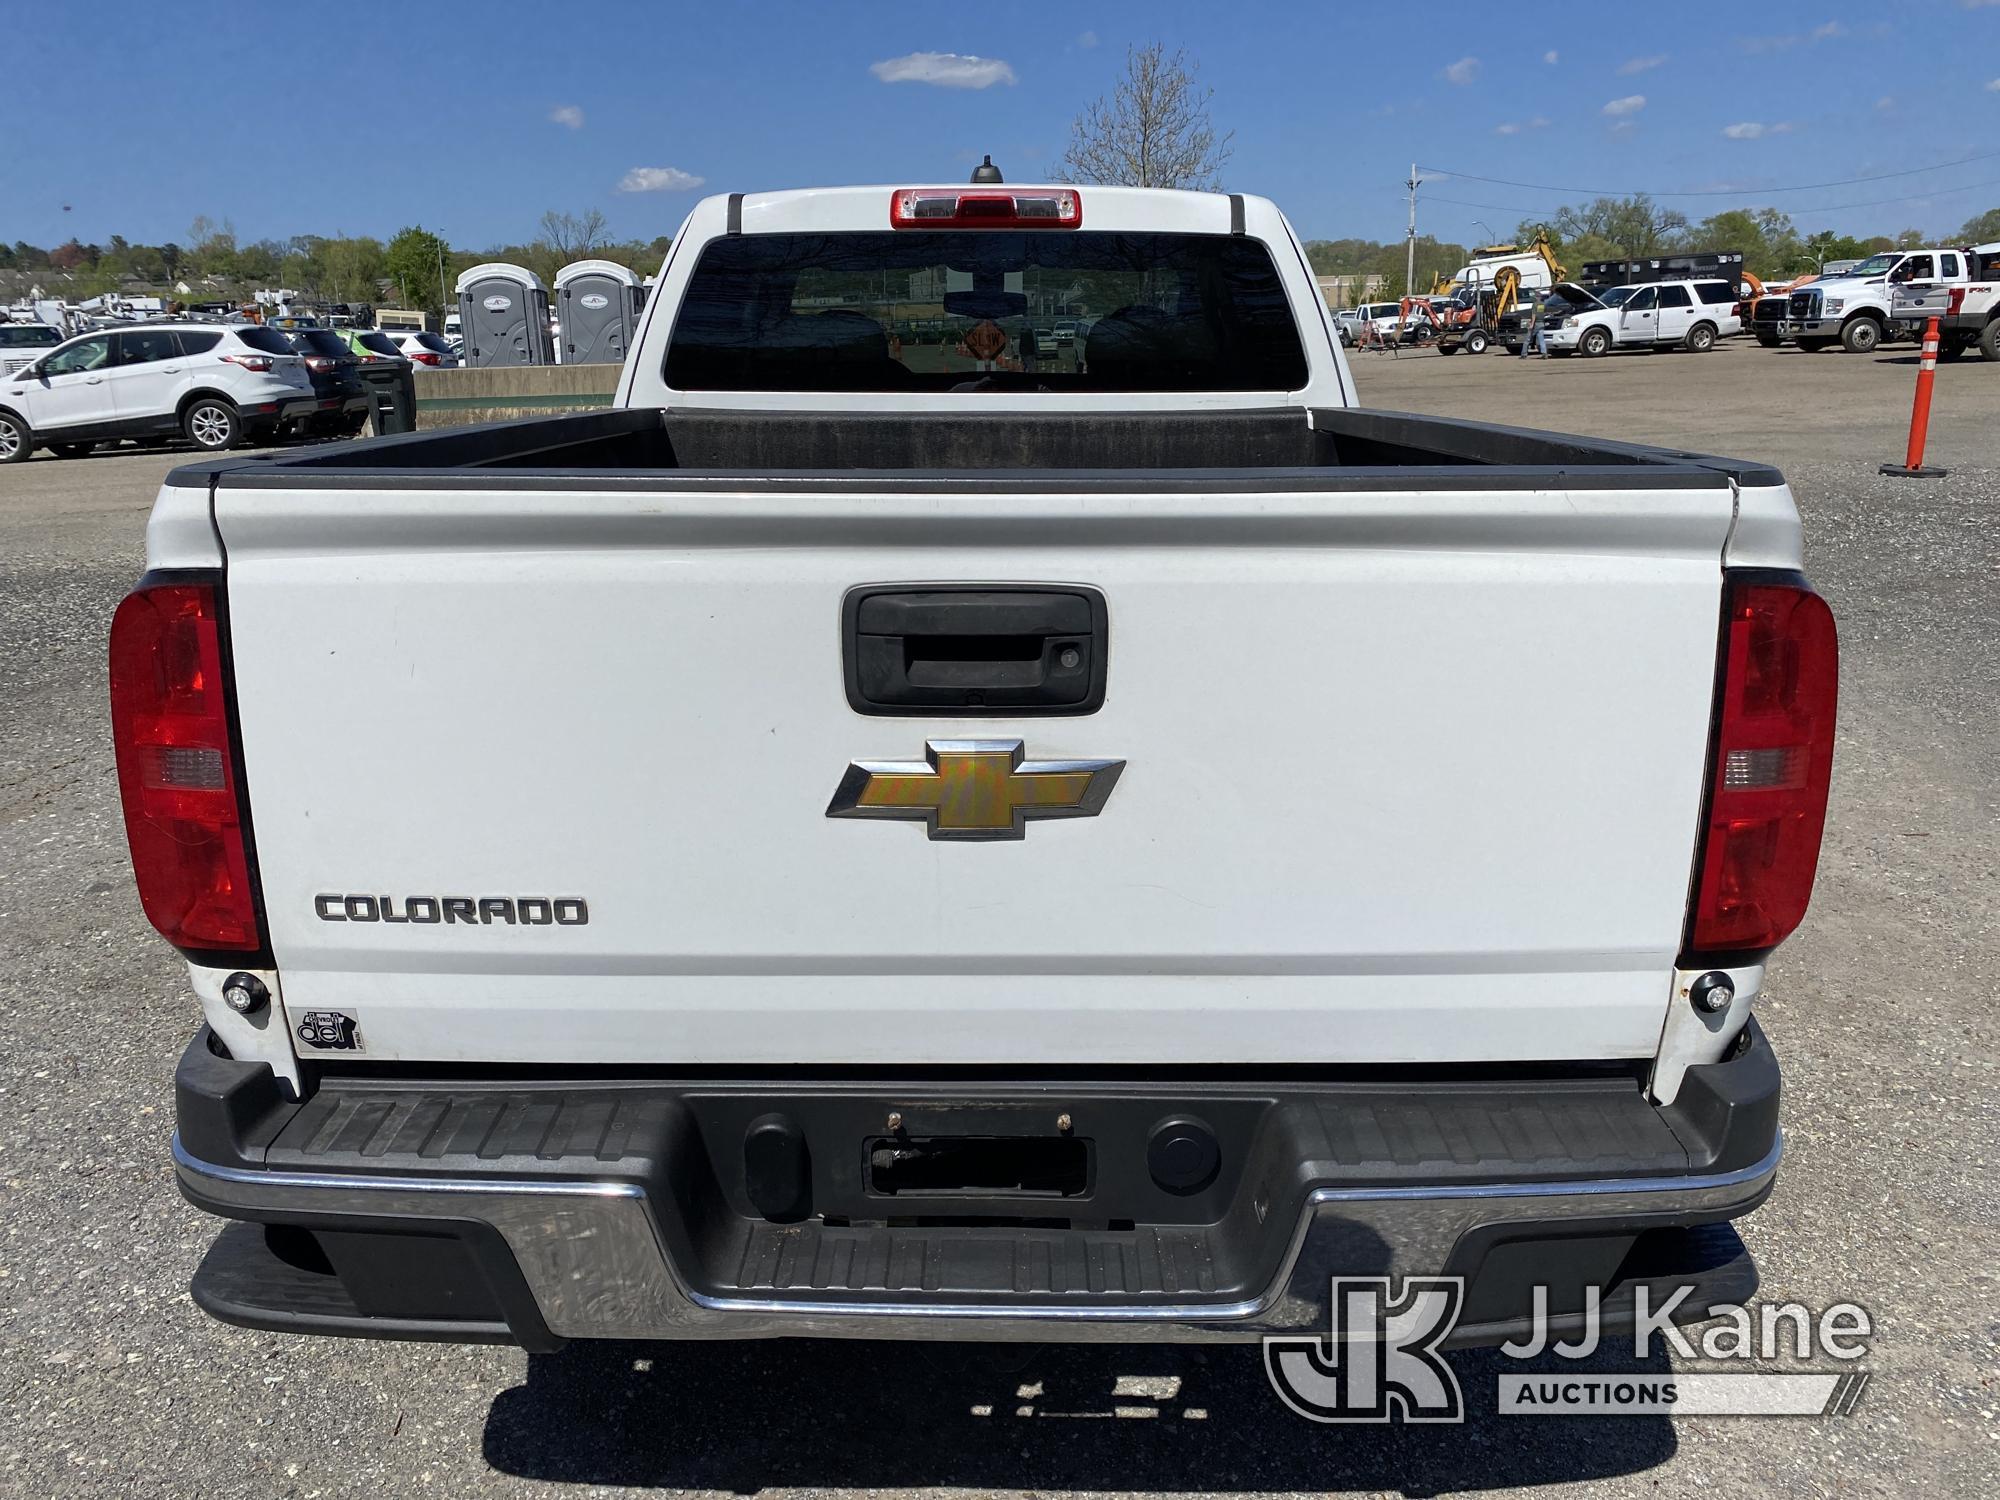 (Plymouth Meeting, PA) 2015 Chevrolet Colorado Extended-Cab Pickup Truck Runs & Moves, Body & Rust D